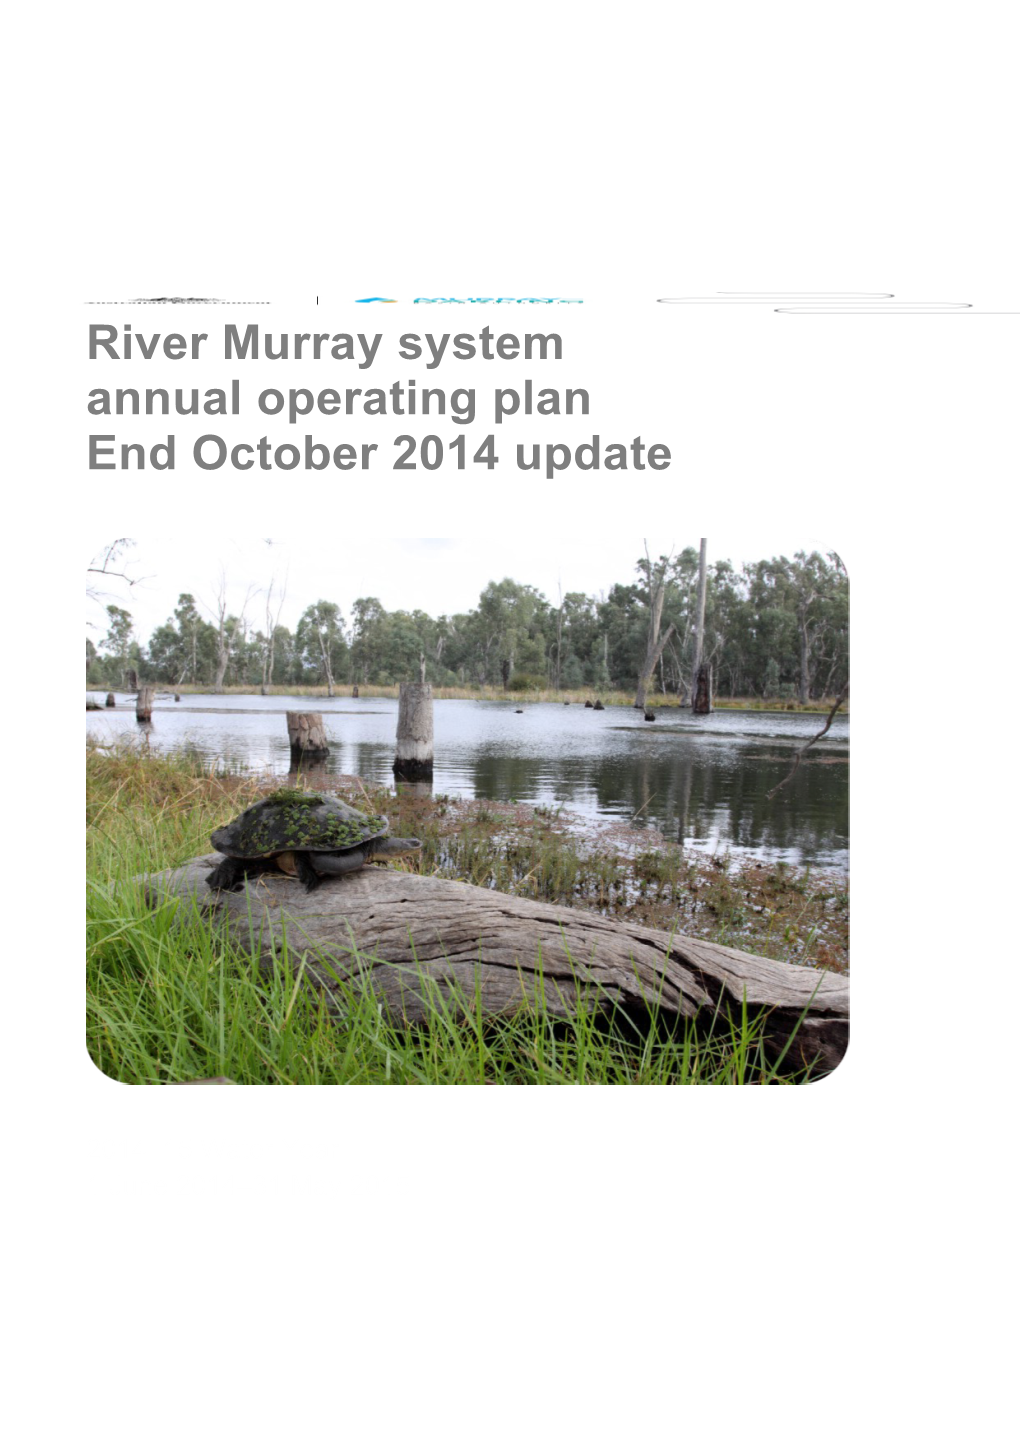 River Murray System Annual Operating Plan End October 2014 Update